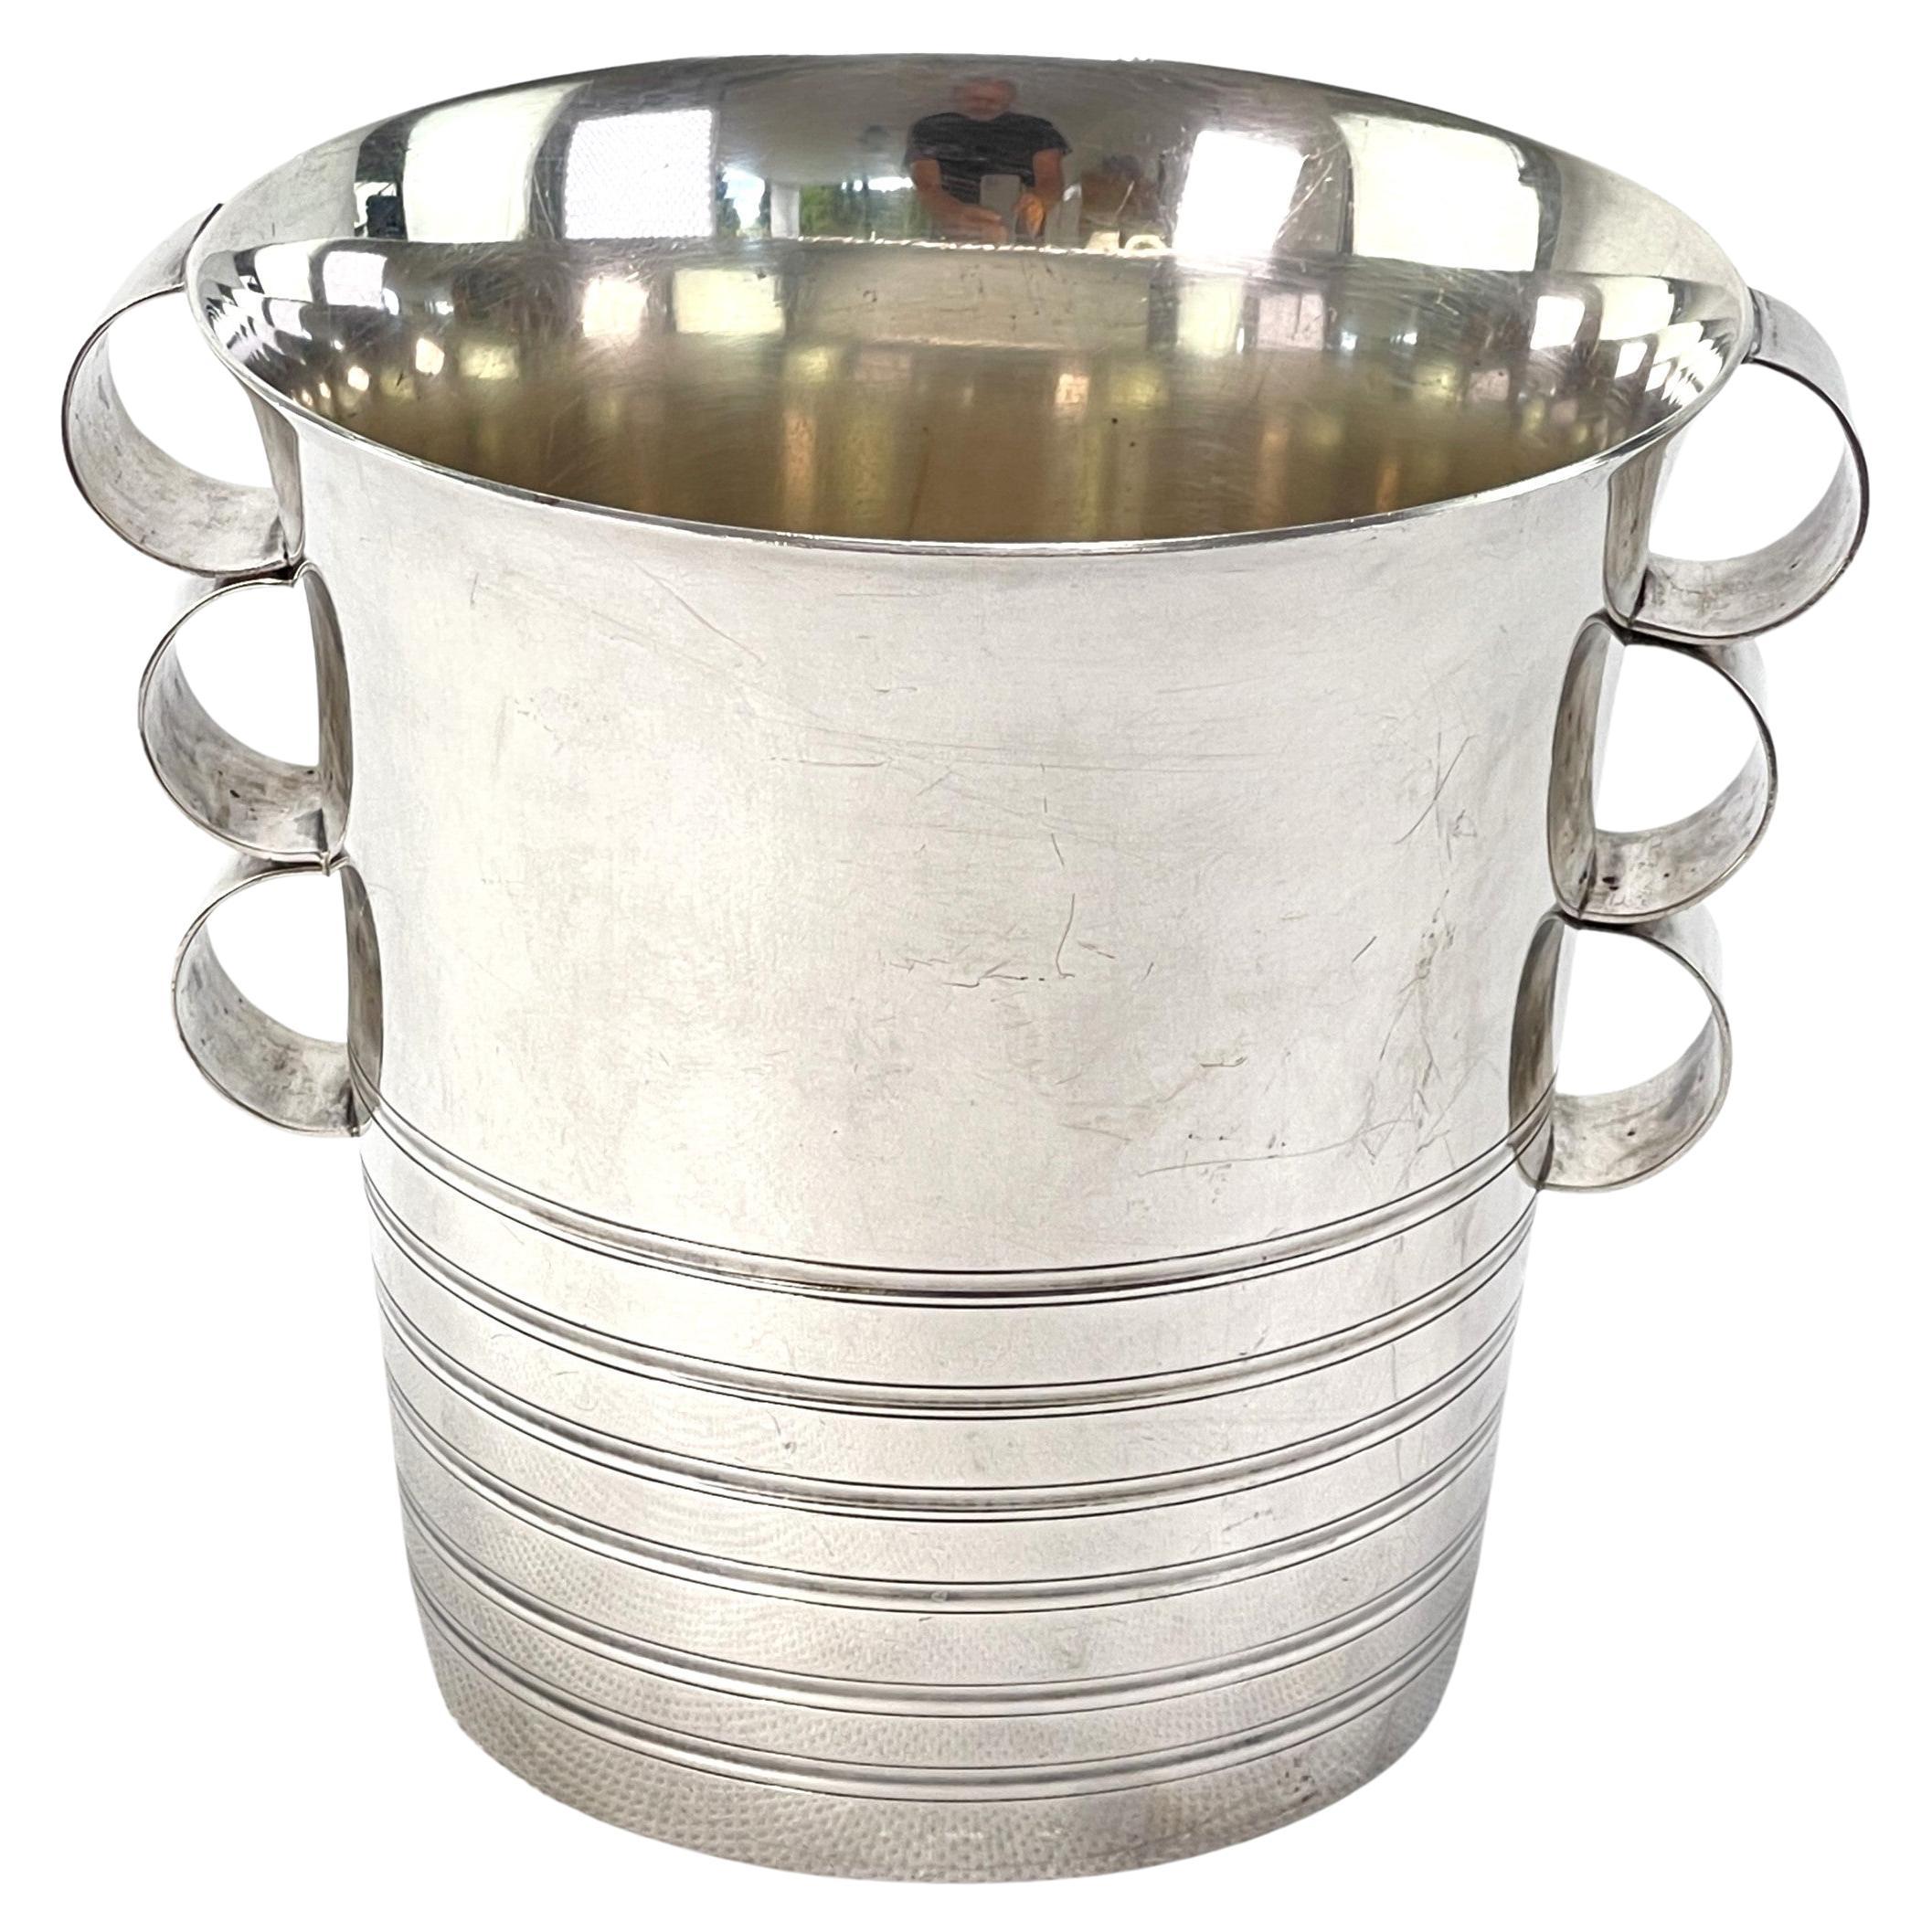 Signed Art Deco Ice Bucket, Silver Plated Cooler, 1930s